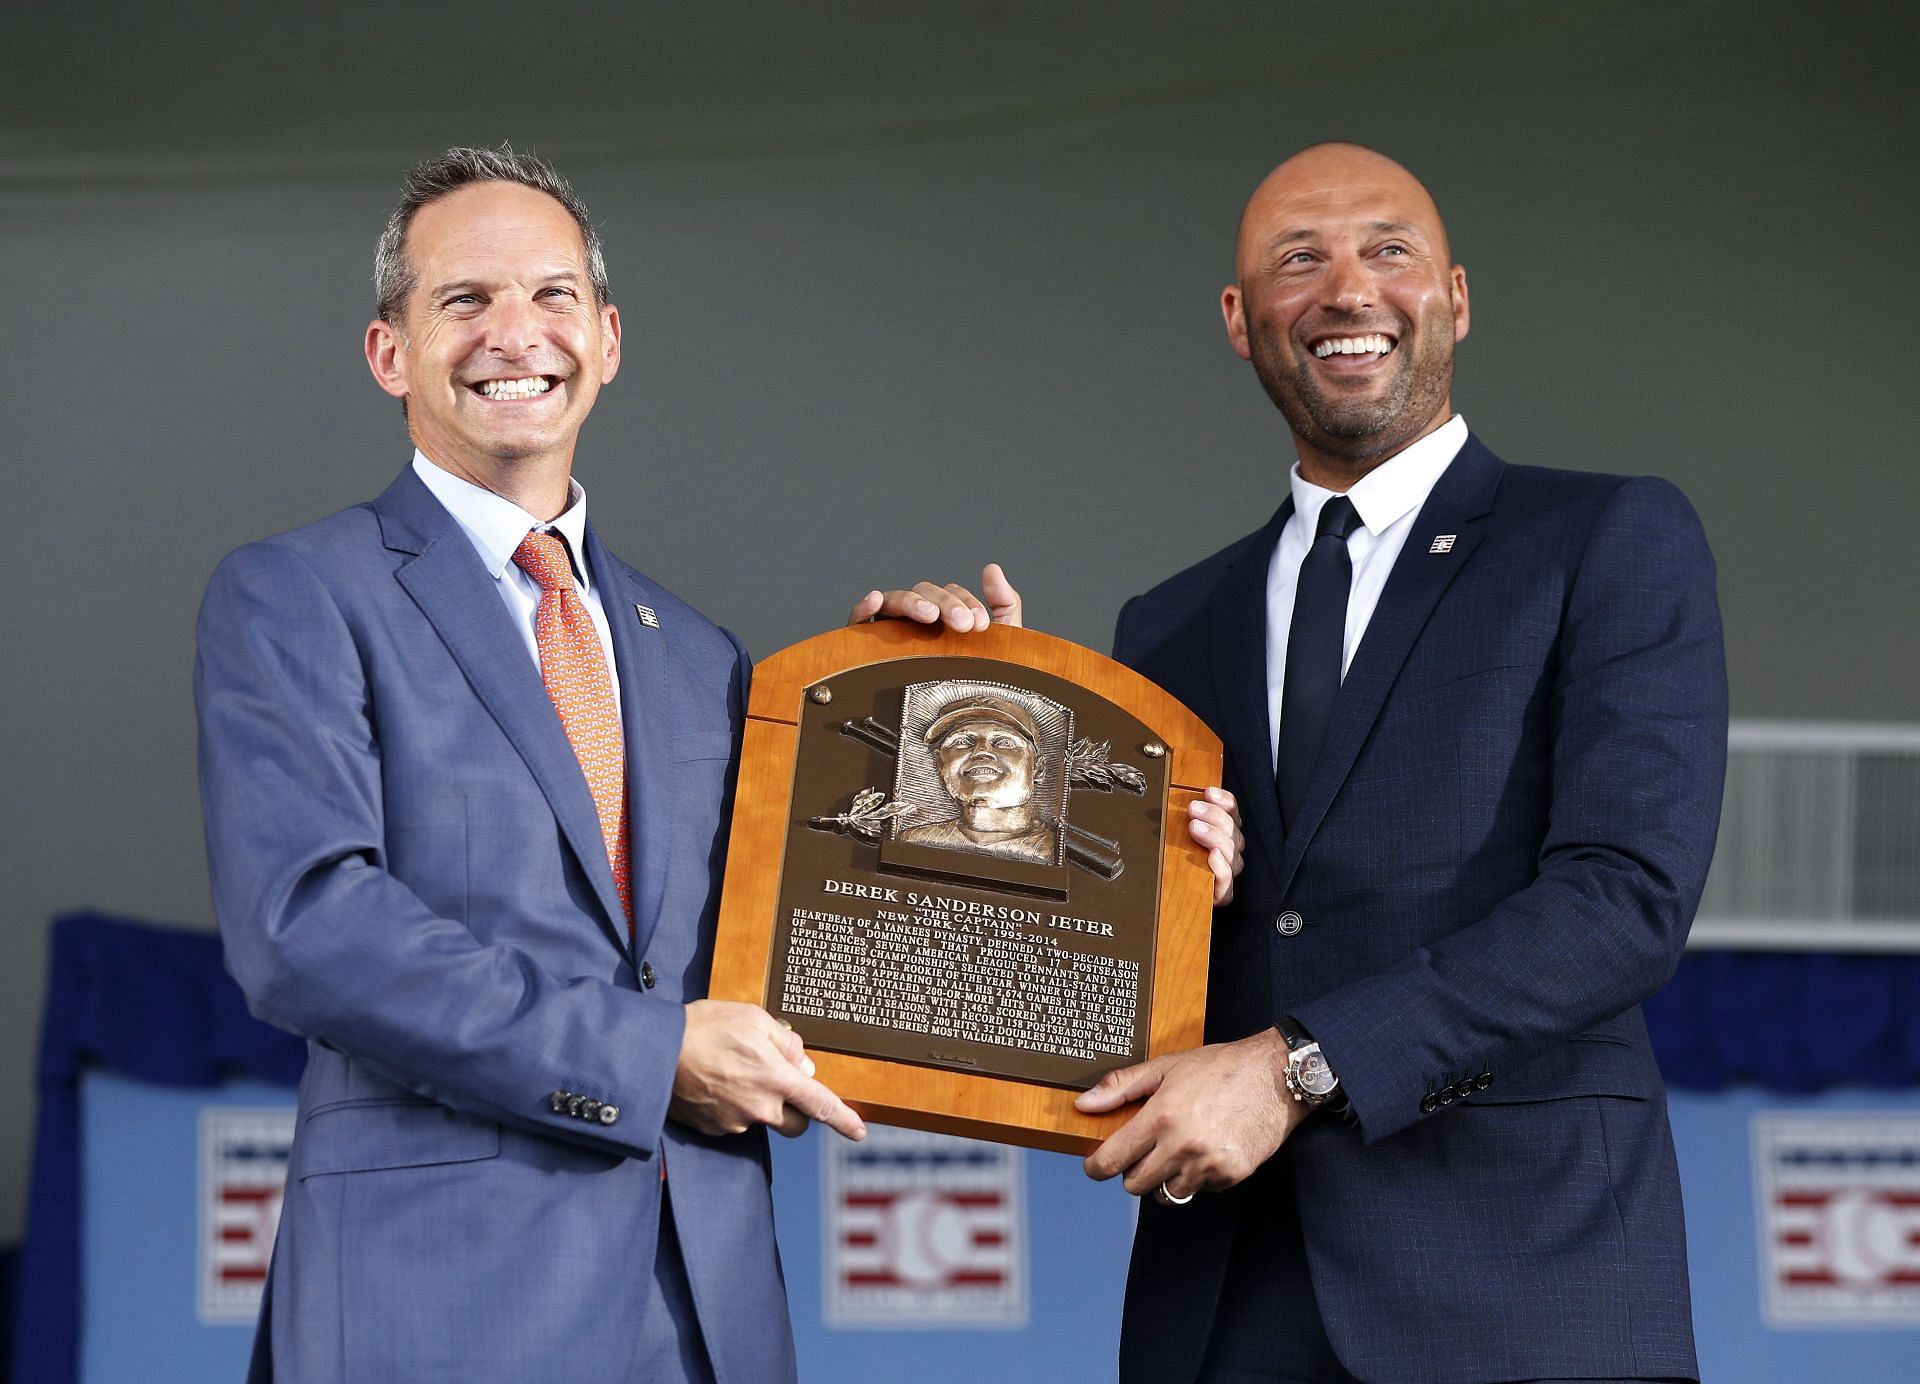 WATCH: Derek Jeter gives thanks to New York Yankees organization and its  fans for their support in return to Yankee Stadium for Hall of Fame Tribute  Night